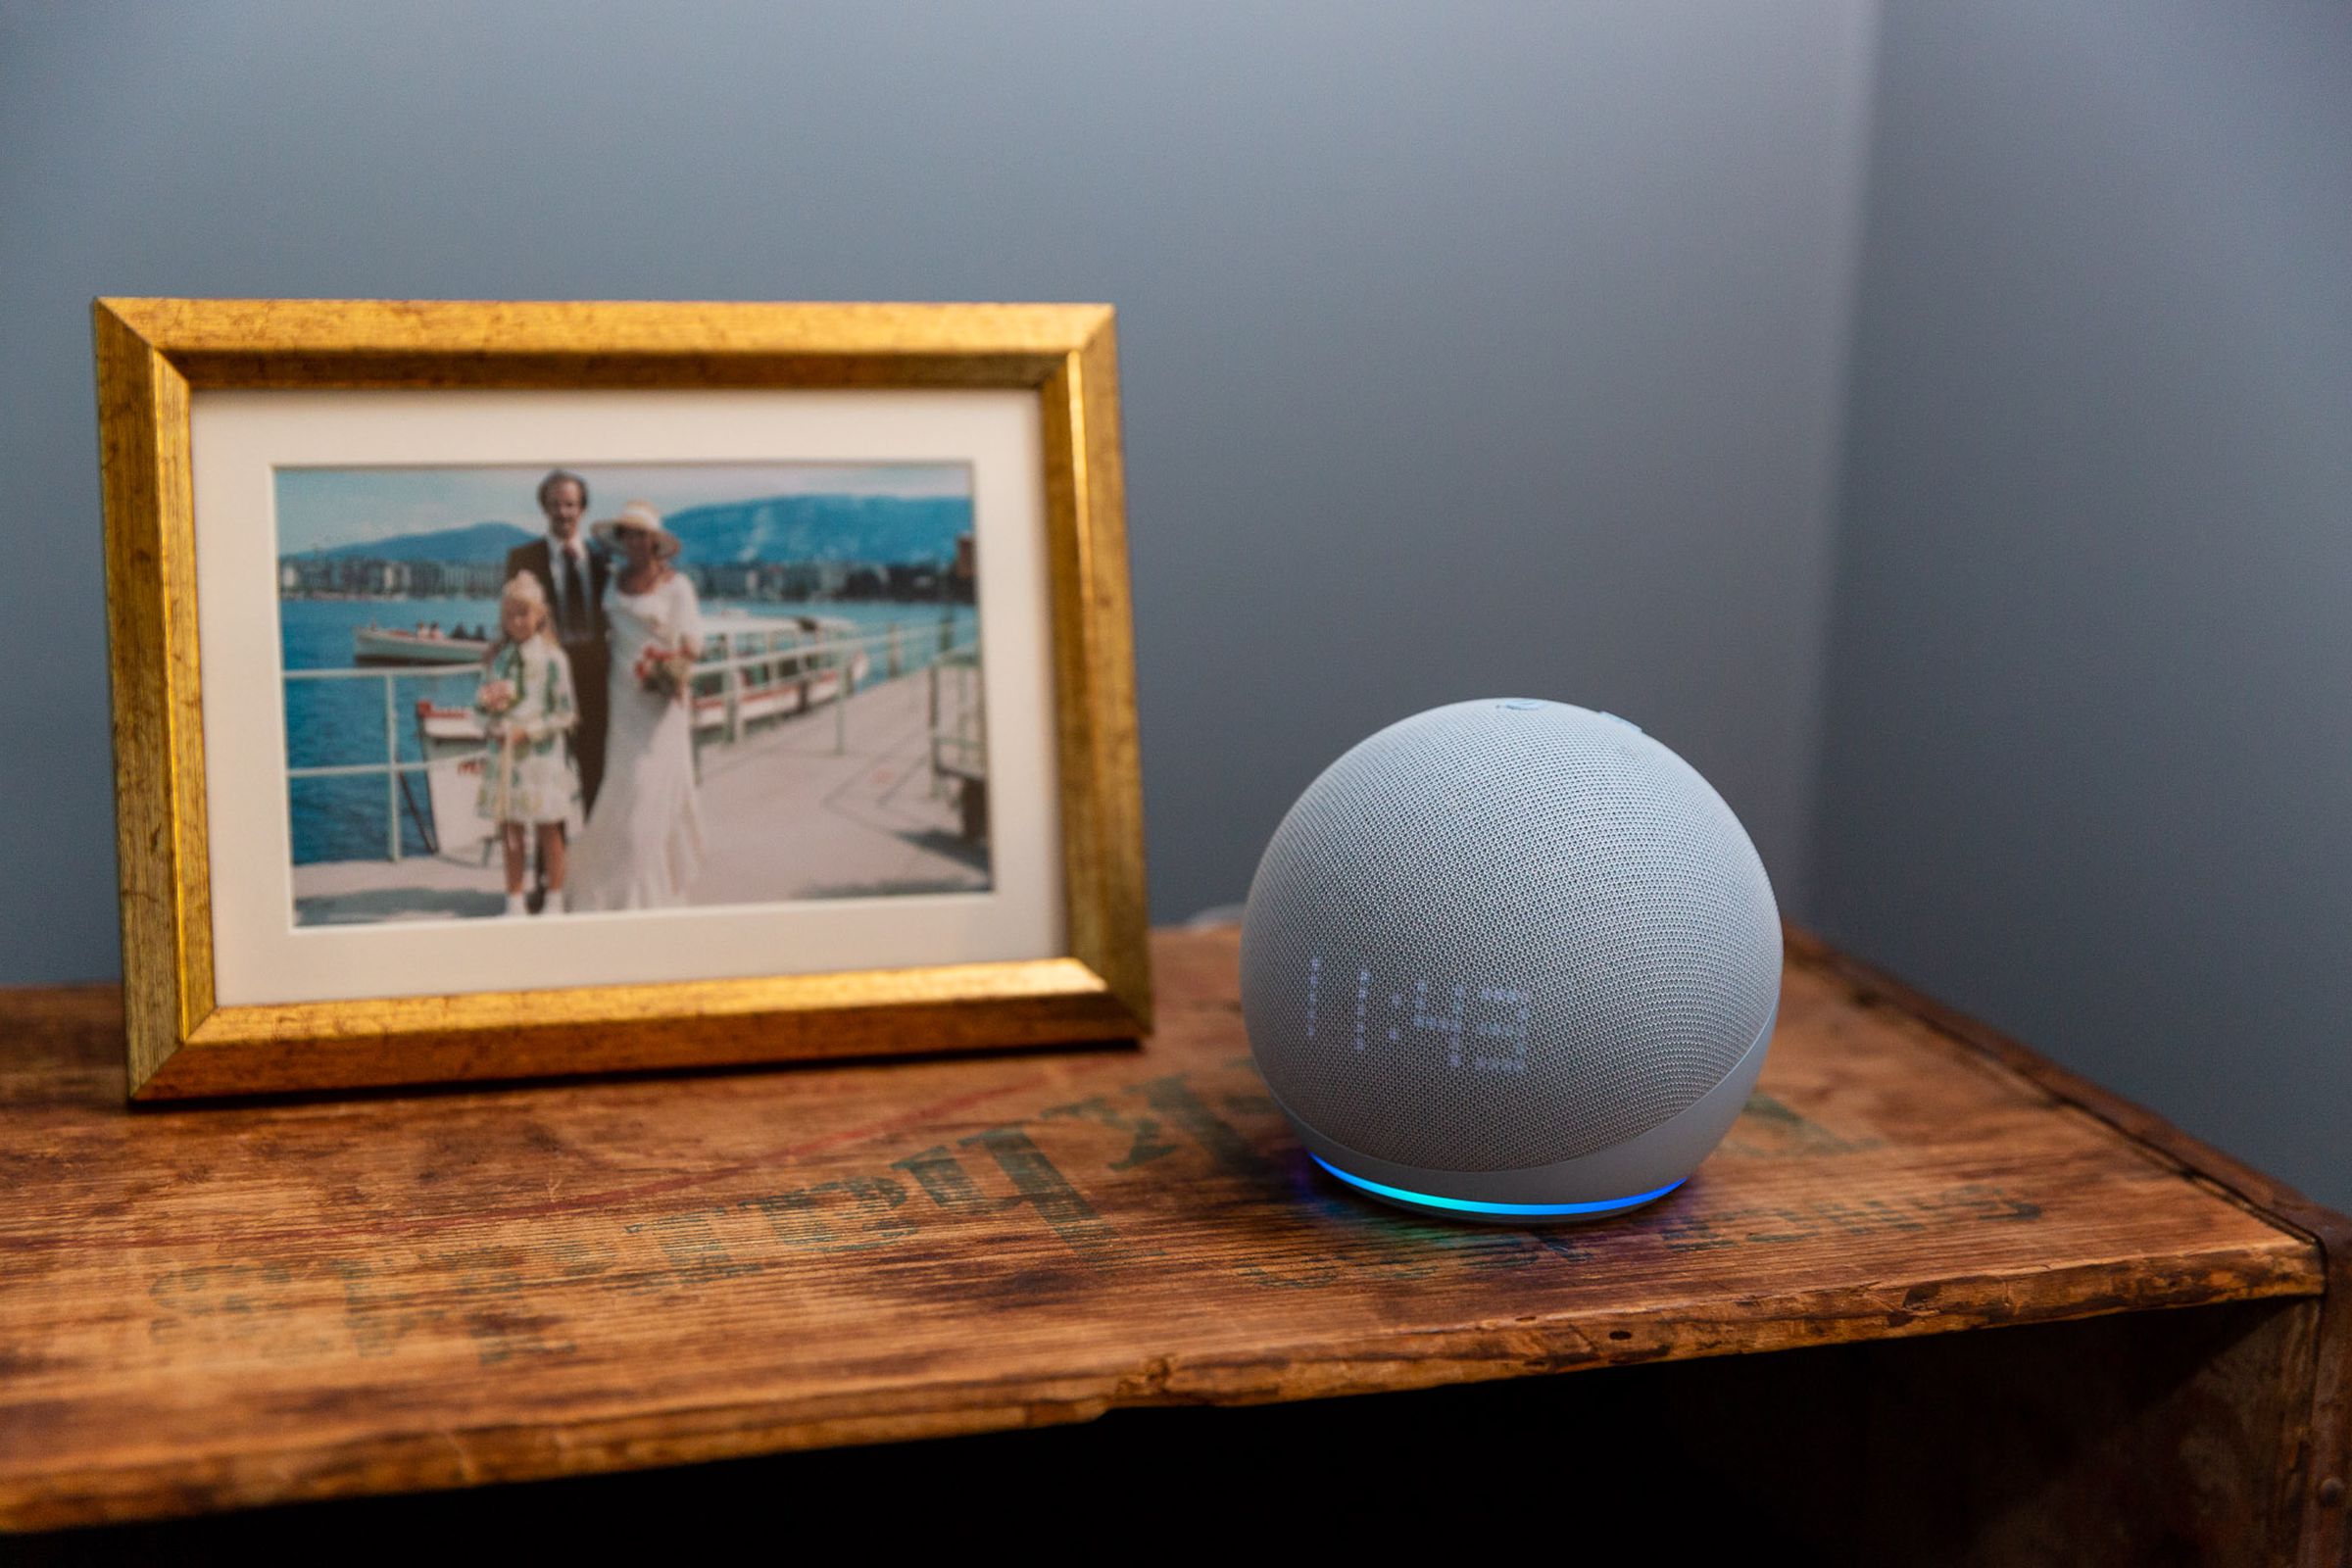 An Echo Dot on a bedside table next to a framed photograph